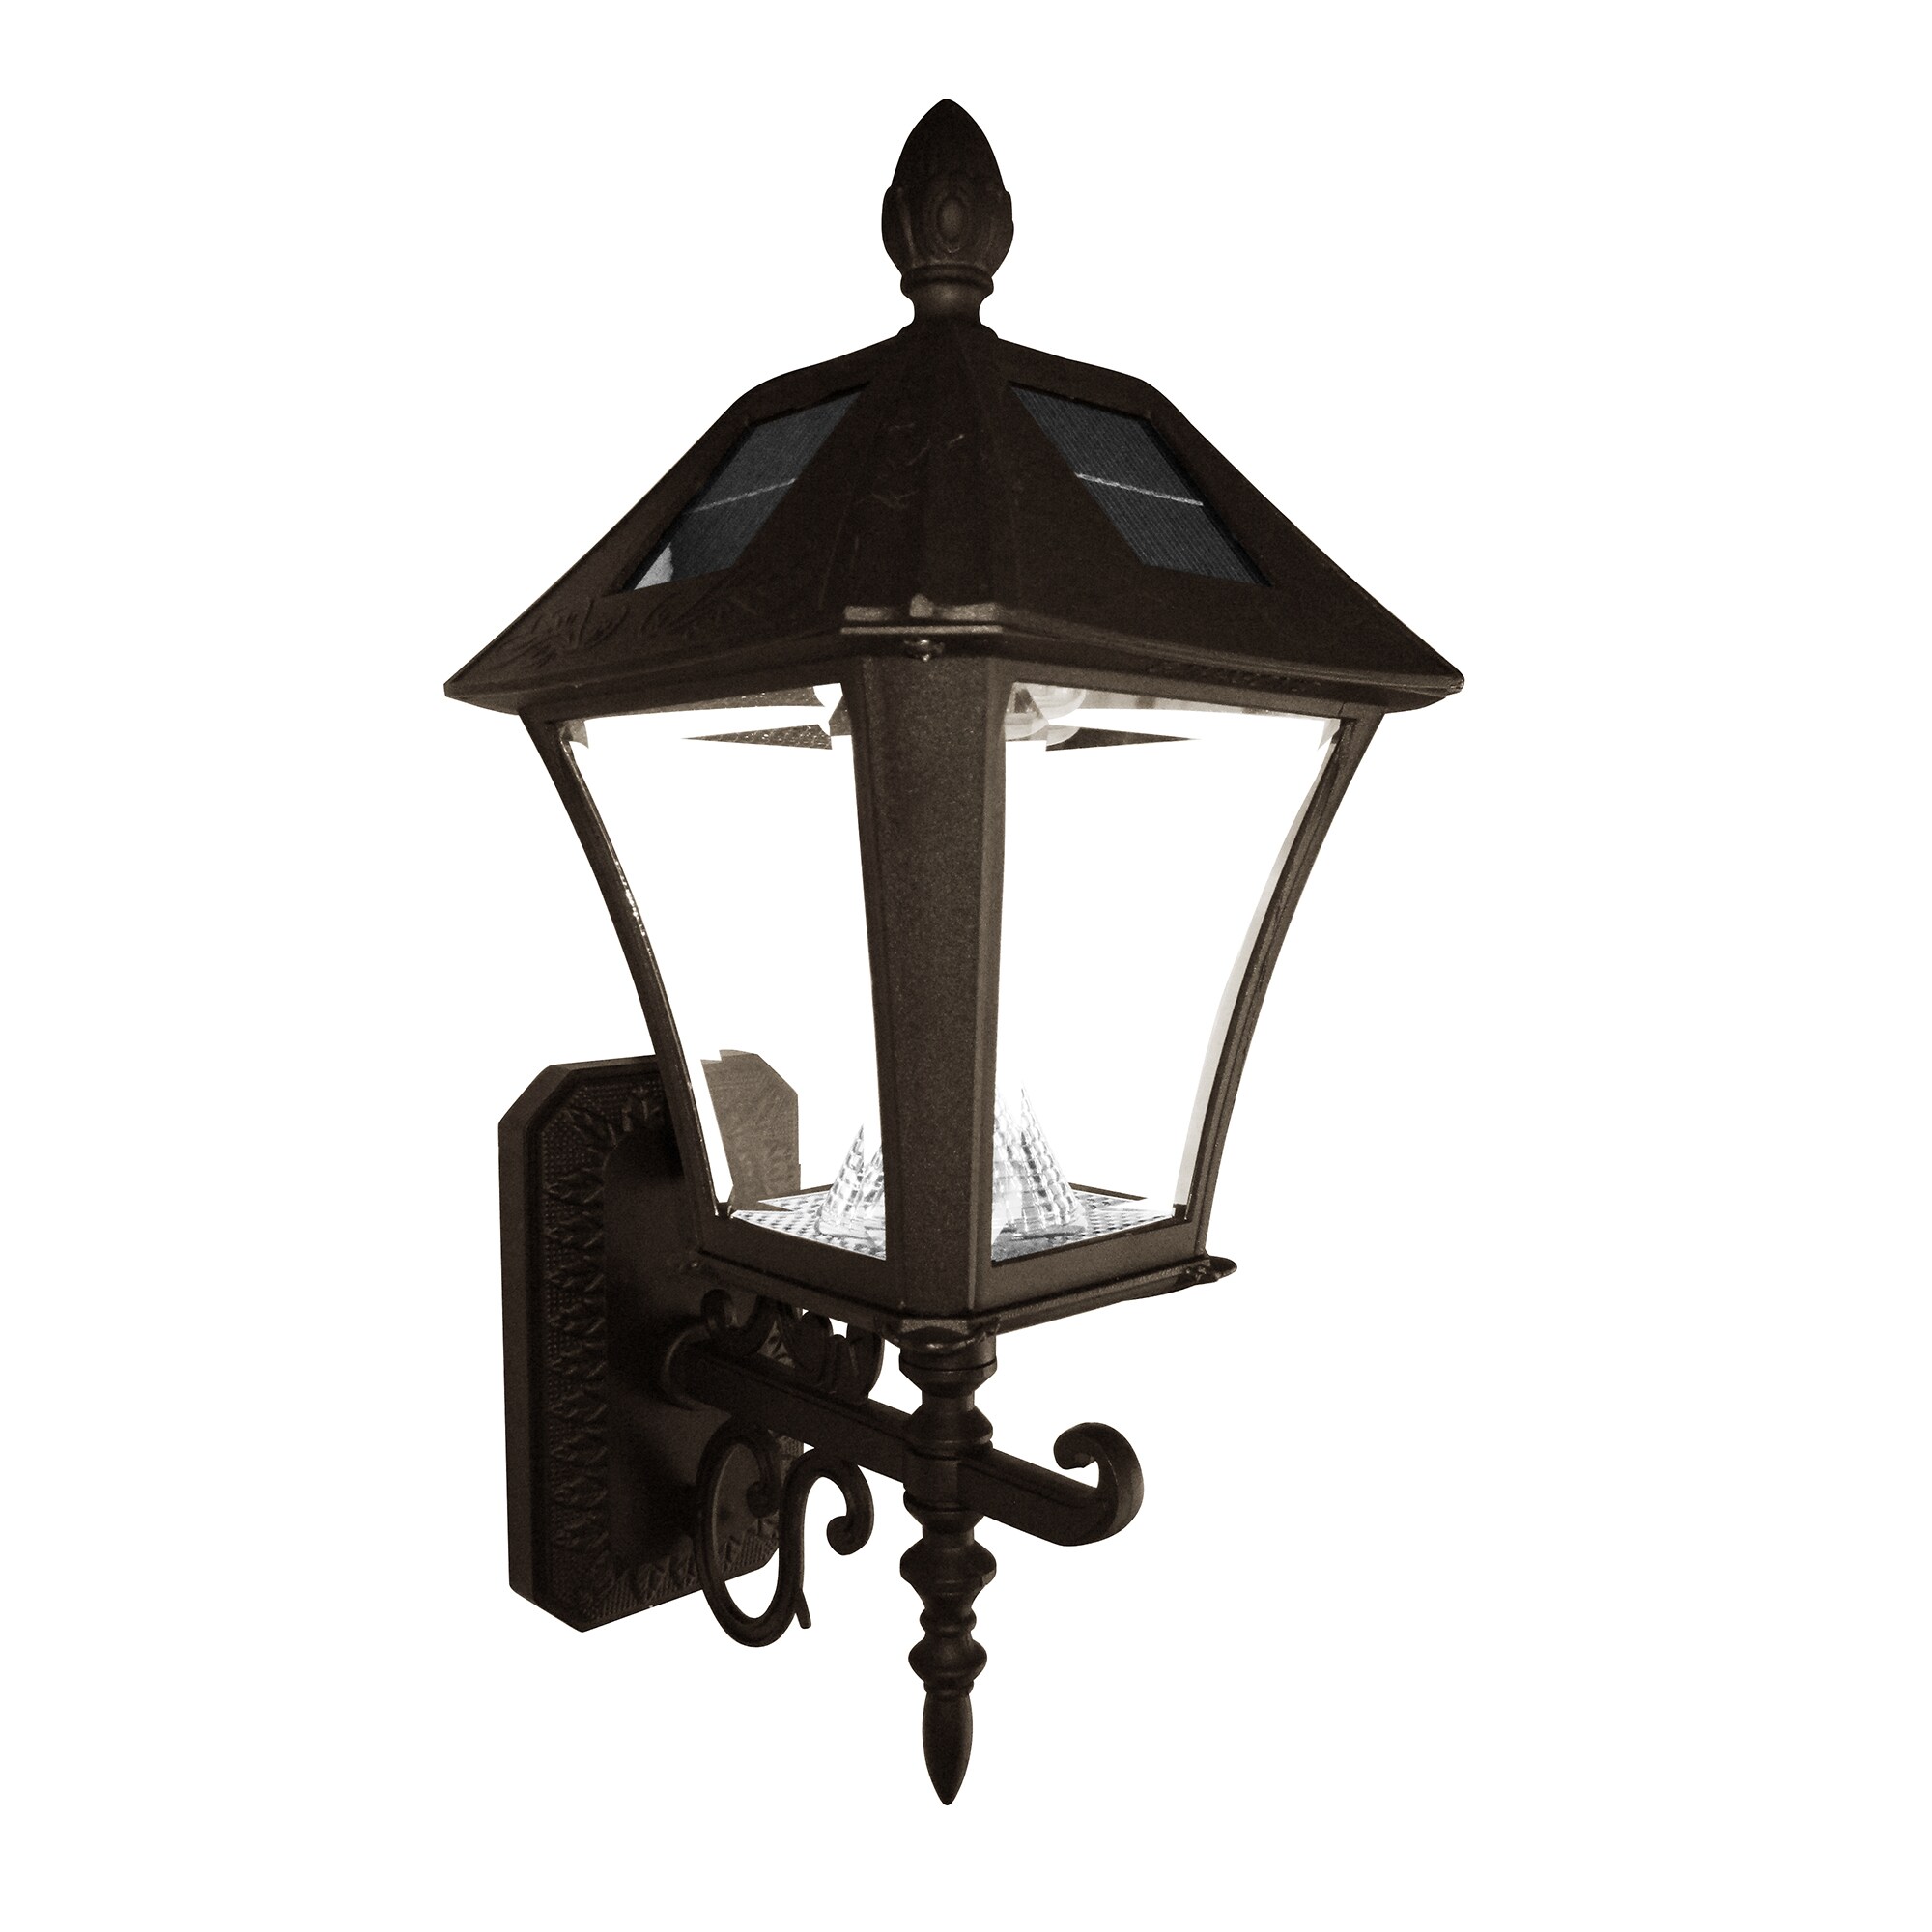 Gama Sonic Baytown 17-in Black Traditional Post Light at